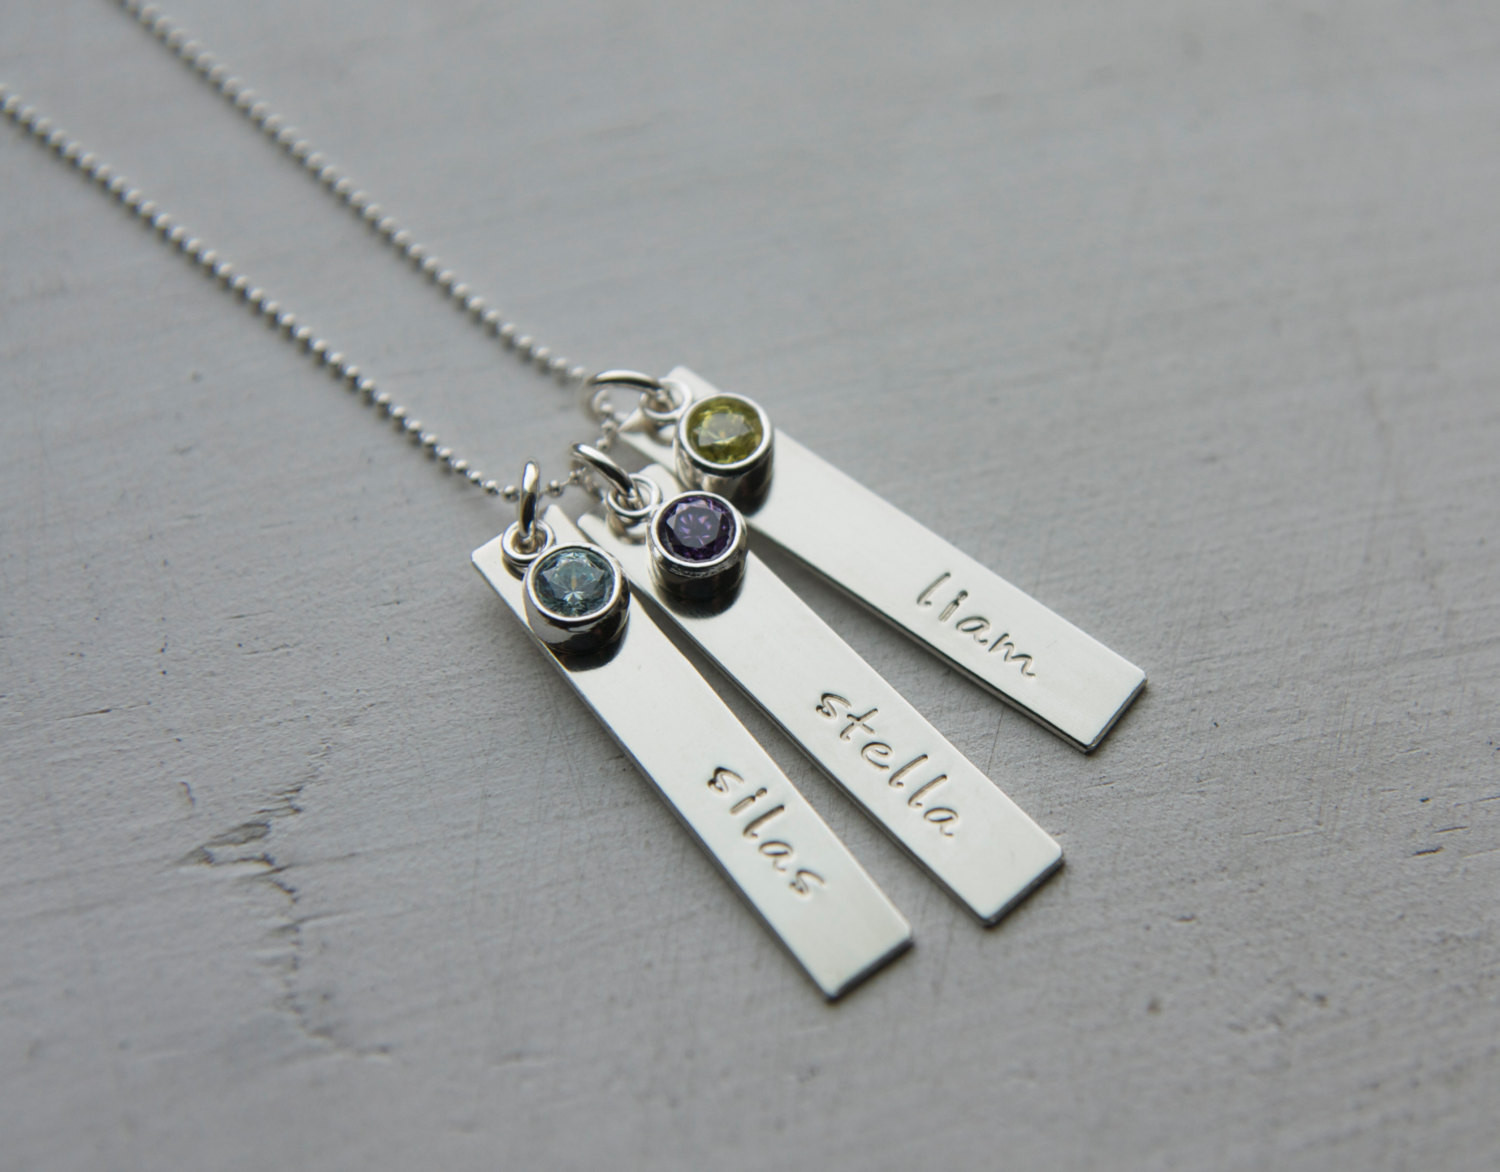 Sterling Silver Bar Necklace Personalized
 Personalized Sterling Silver Birthstone Bar Necklace 3 Kids